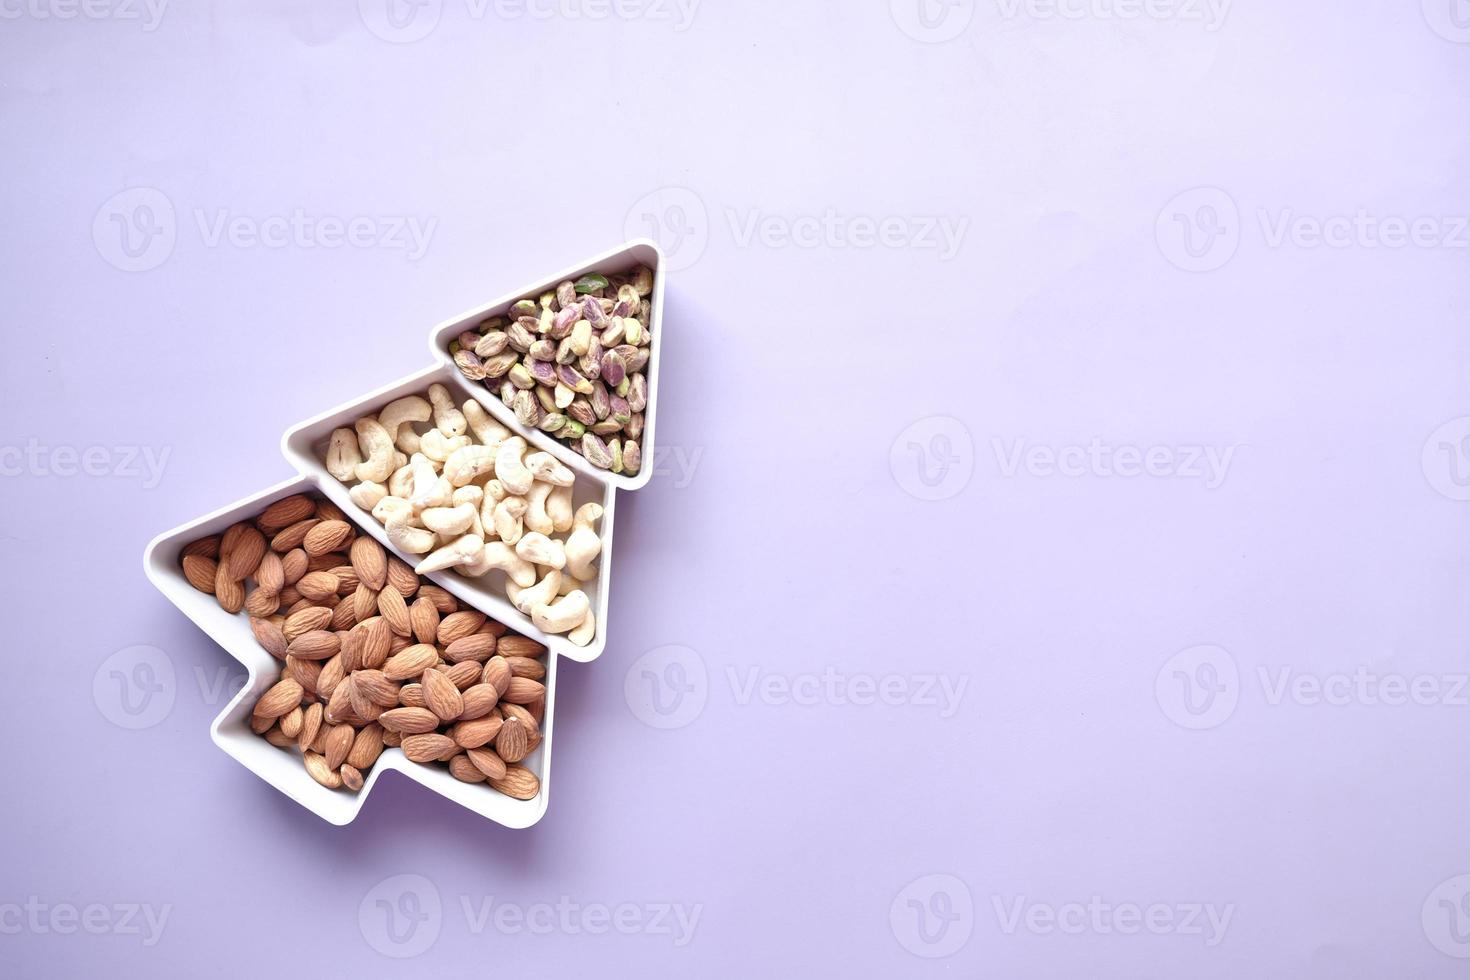 walnut , cashew nut and almond in a container on table photo